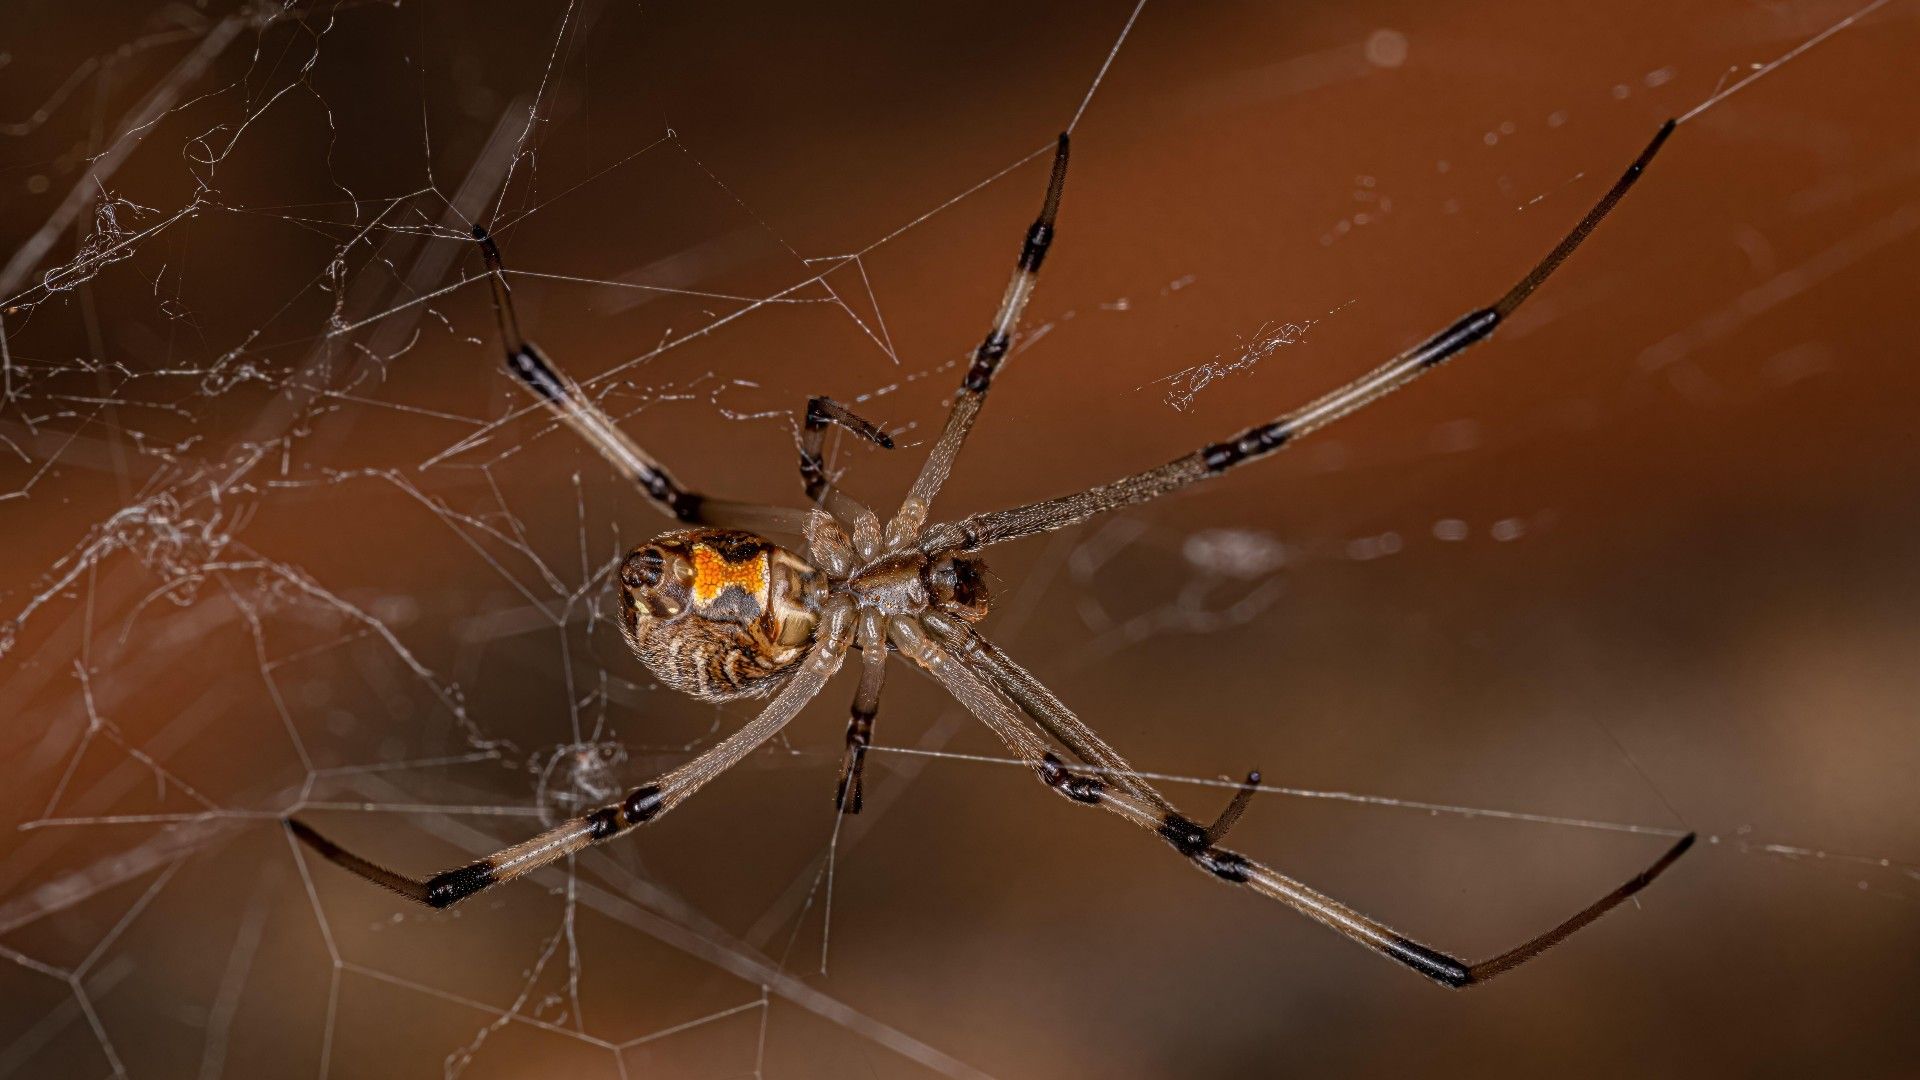 <p>                     <em>Latrodectus geometricus</em> is the scientific name for the brown widow spider. It looks similar to its infamous "cousin" the black widow, right down to the hourglass-shaped marking on its abdomen, but there are some key differences. The brown widow’s marking is orange and yellow rather than red, and as their name suggests, they predominantly have tan and brown mottling and a spiky, rather than smooth, appearance. Believed to originate in South America, the brown widow spider is found all around the world.                   </p>                                      <p>                     The brown widow's venom is less toxic than that of its black cousin. However, it can still be deadly. Although they don't deliver as much venom as a black widow, the brown widow's bite can still cause latrodectism due to its neurotoxic venom. Symptoms of lactrodectism include pain, perspiration, muscle rigidity and vomiting.                   </p>